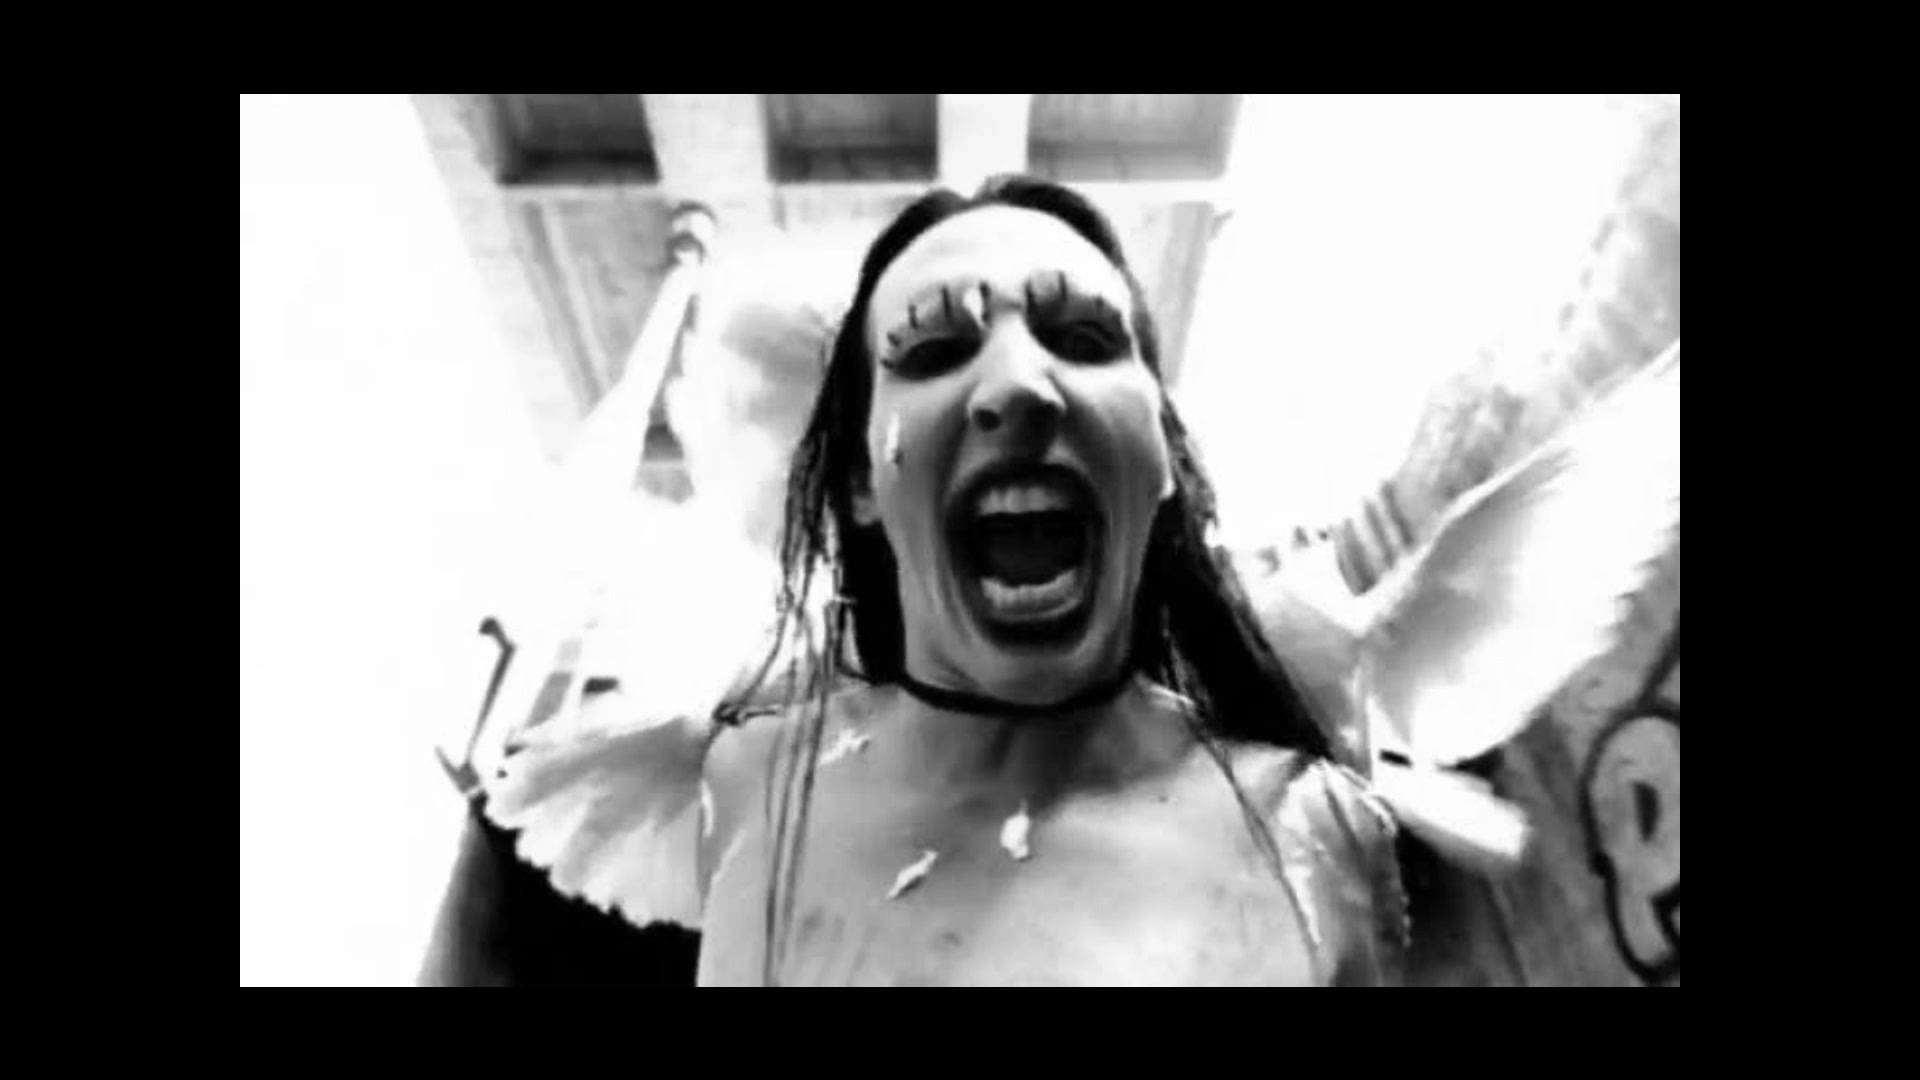 1920x1080 Marilyn Manson - Sweet Dreams (Are Made Of This..) official version -  YouTube